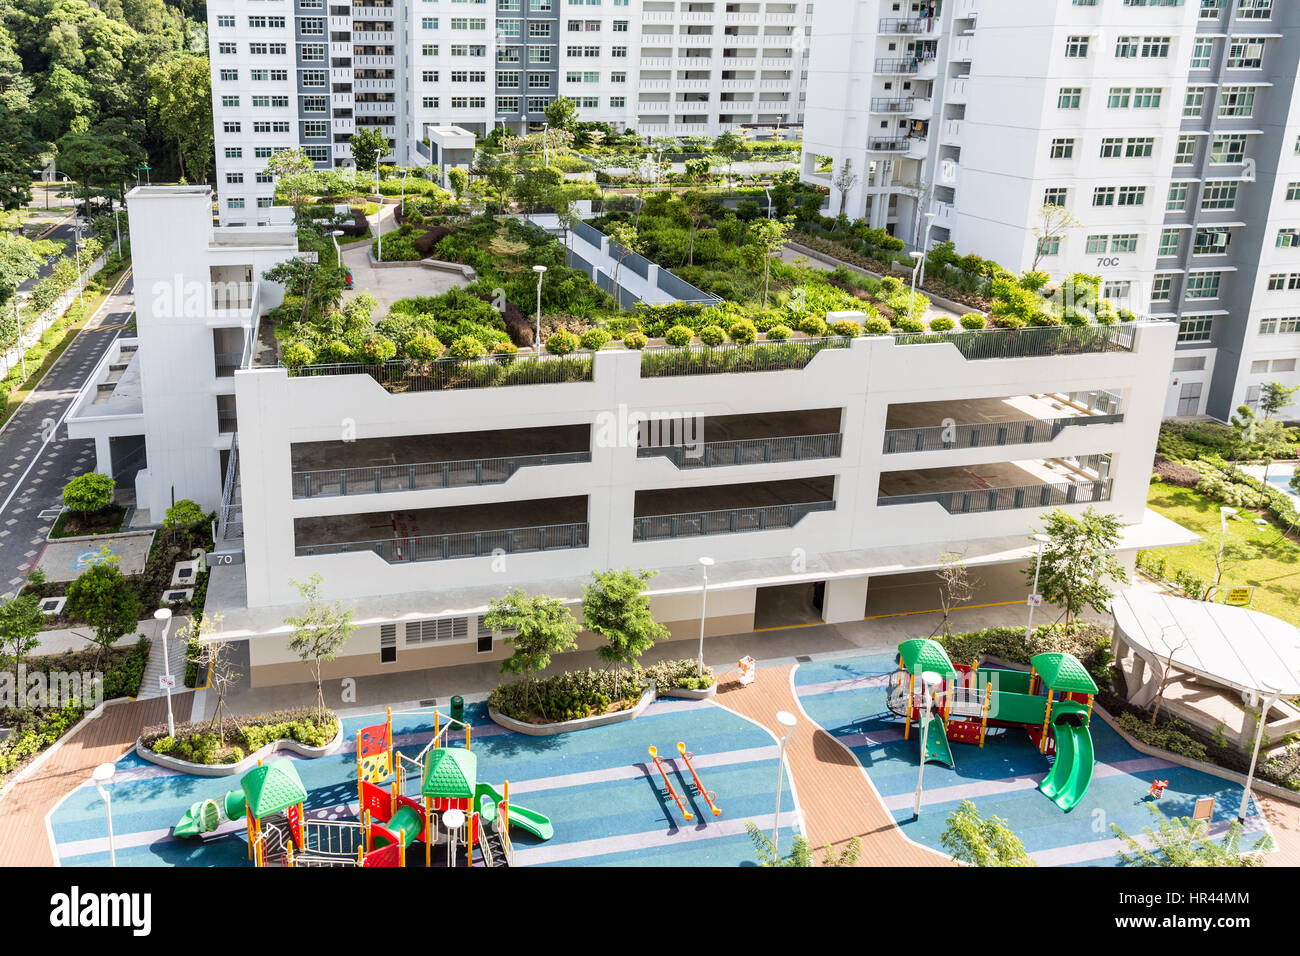 rooftop-gardens-feature-in-new-public-hdp-apartments-in-singapore-HR44MM.jpg